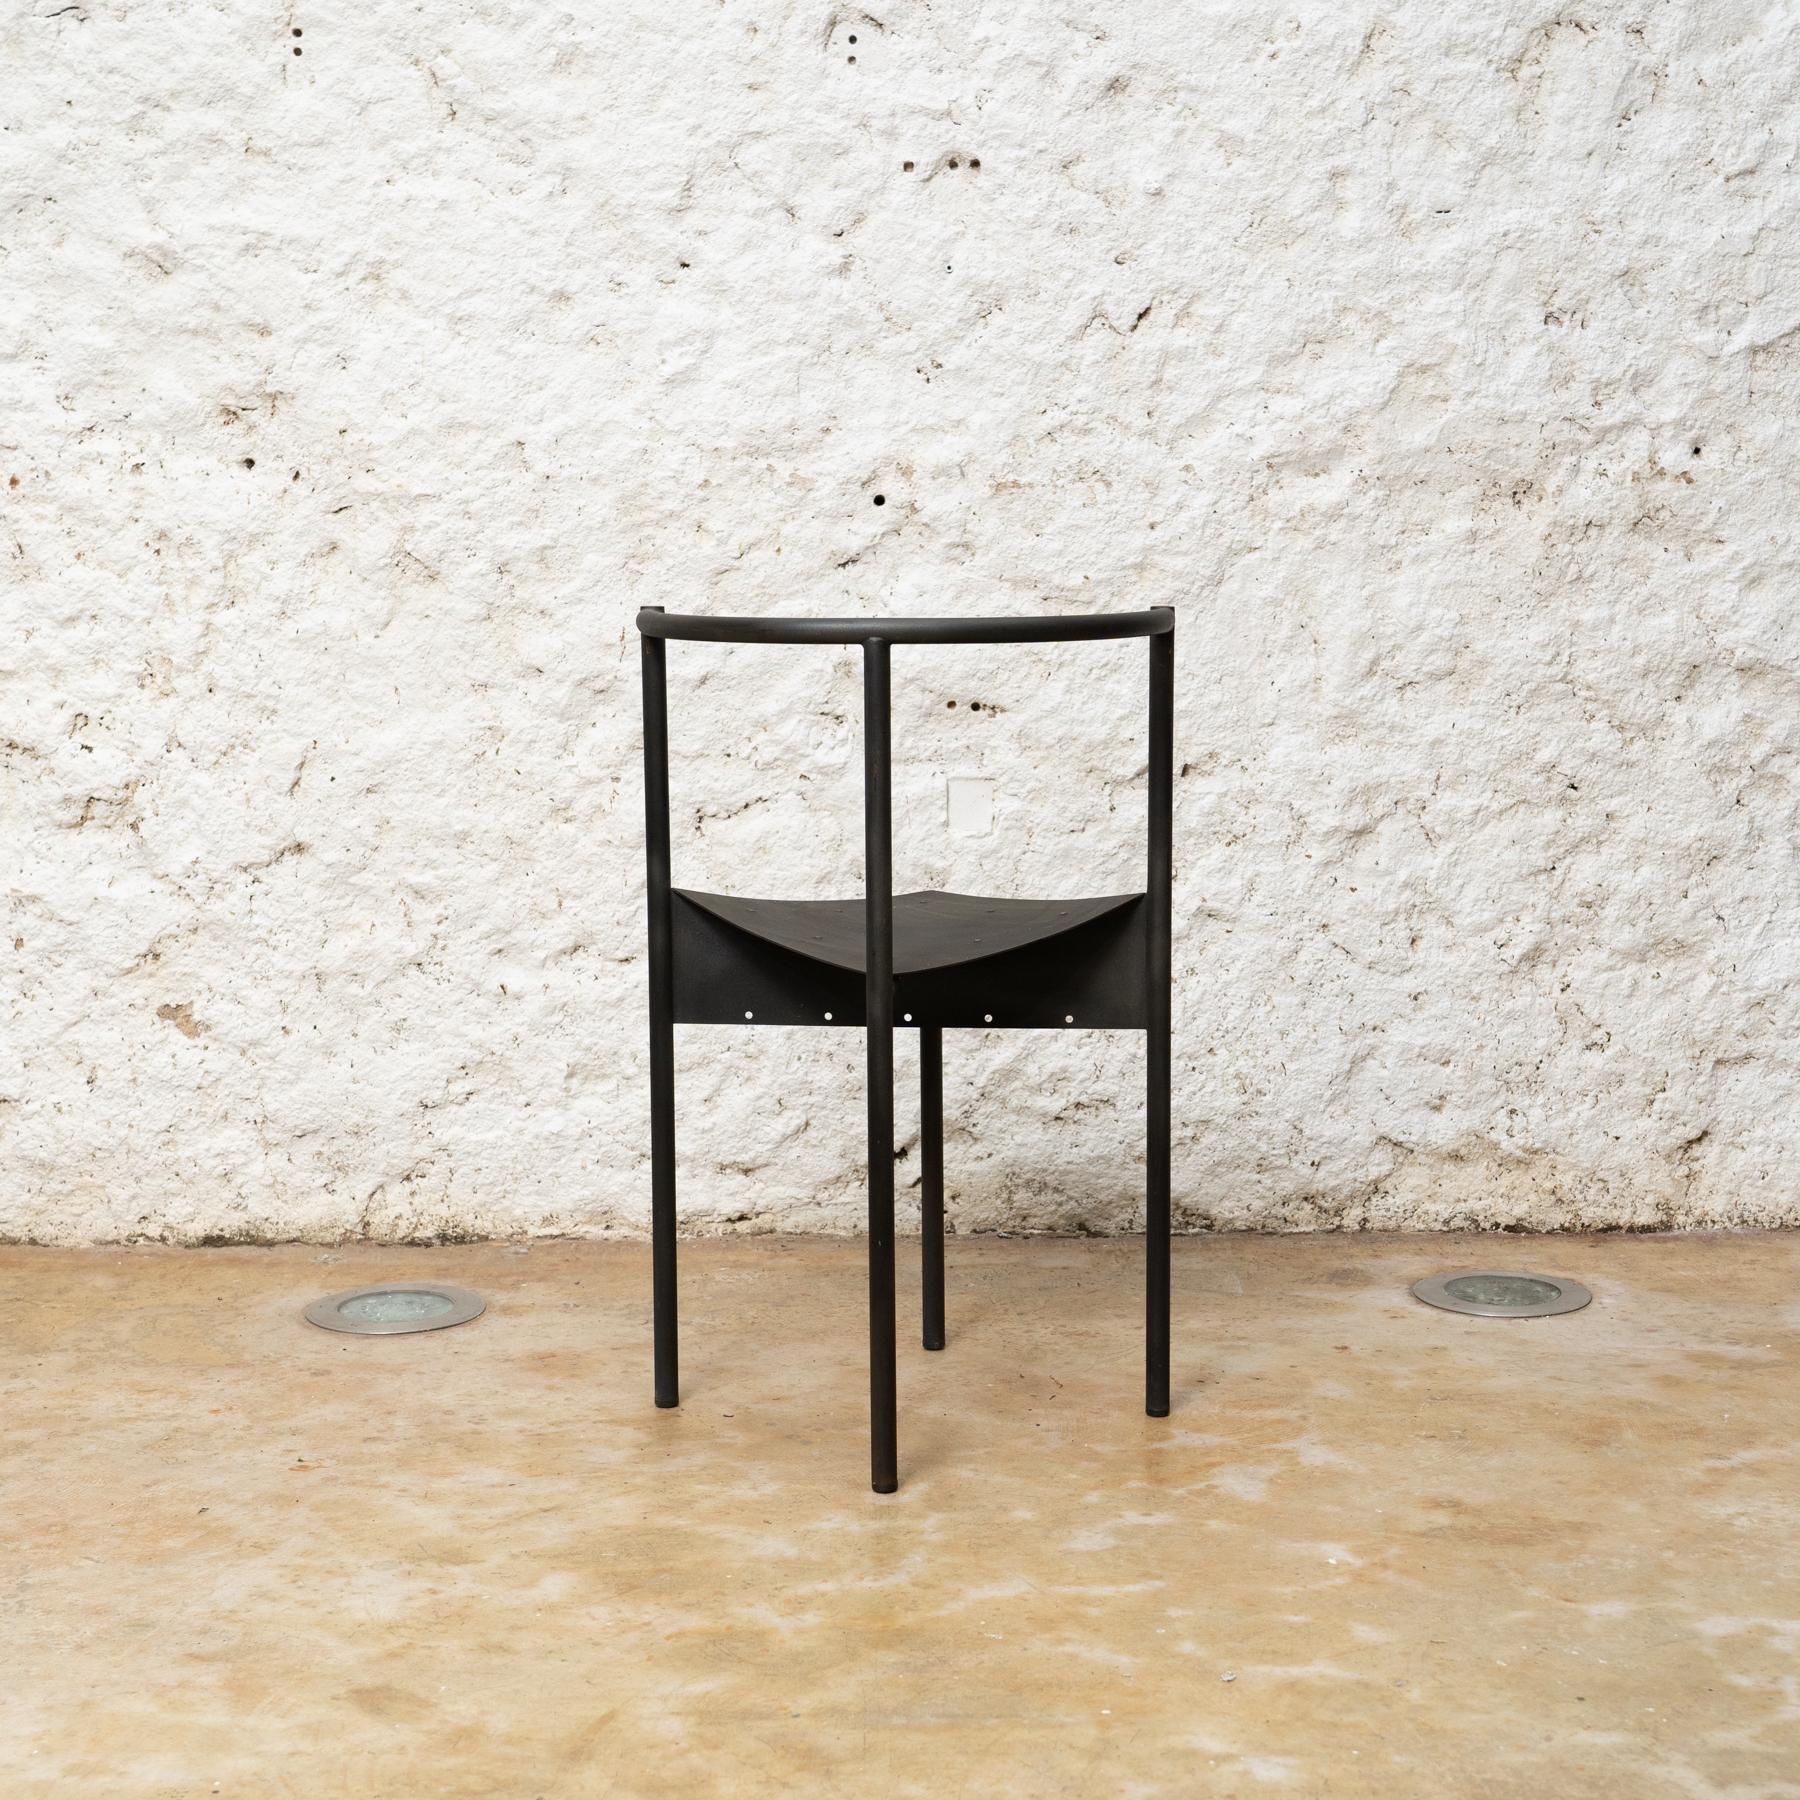 Chair Wendy Wright by Phillipe Starck for Disform, circa 1983 In Good Condition For Sale In Barcelona, Barcelona